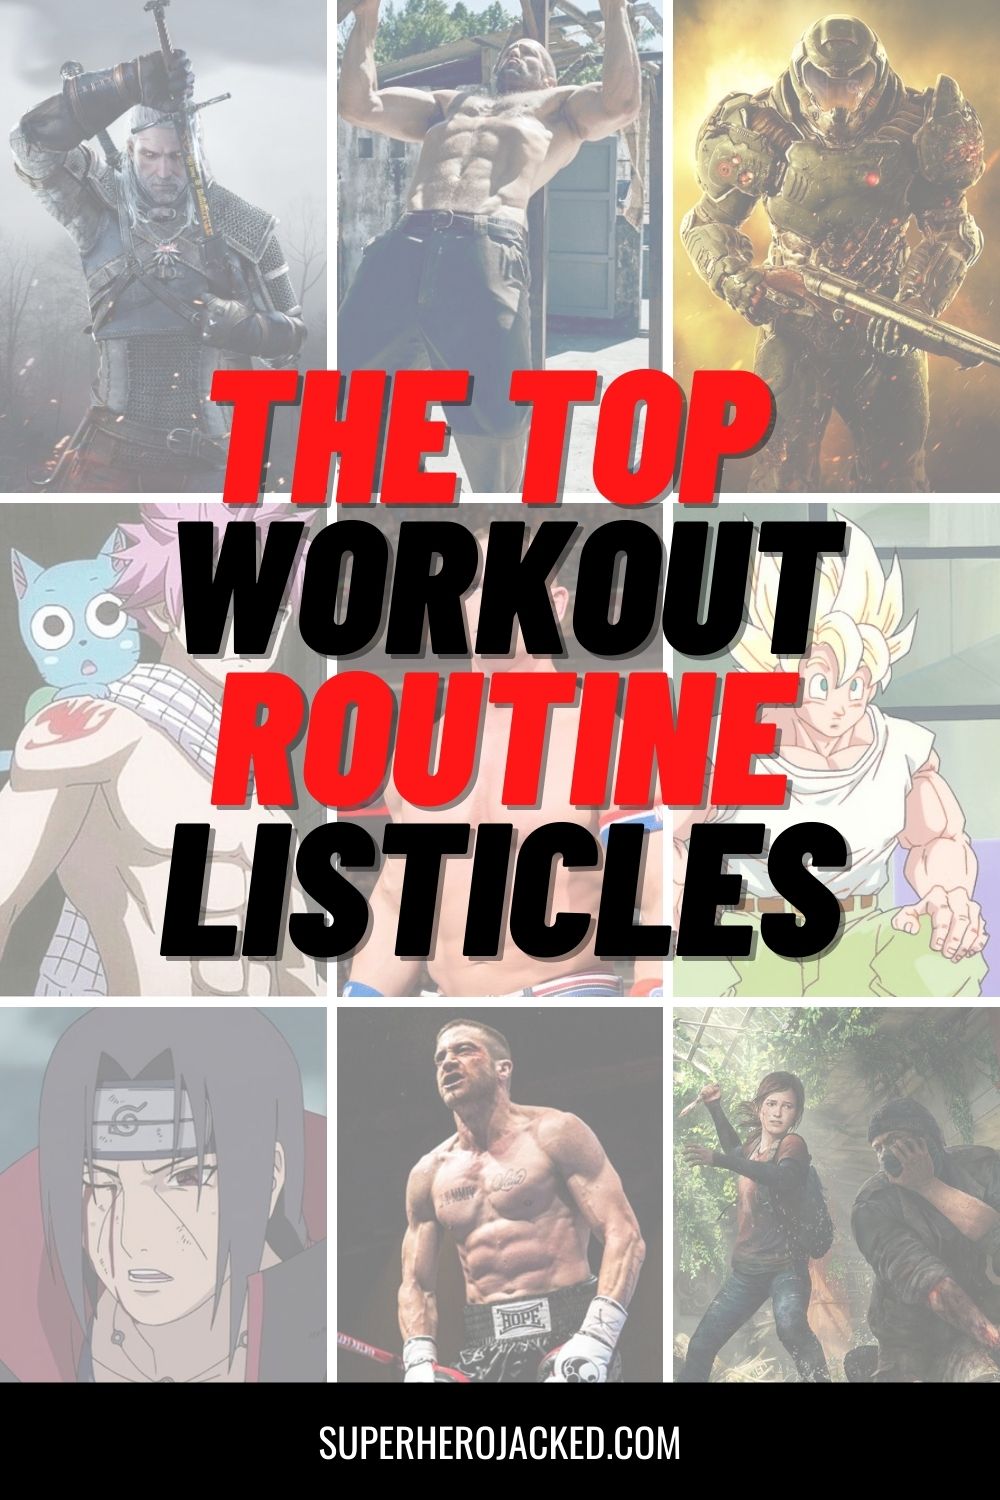 Top Workout Listicles